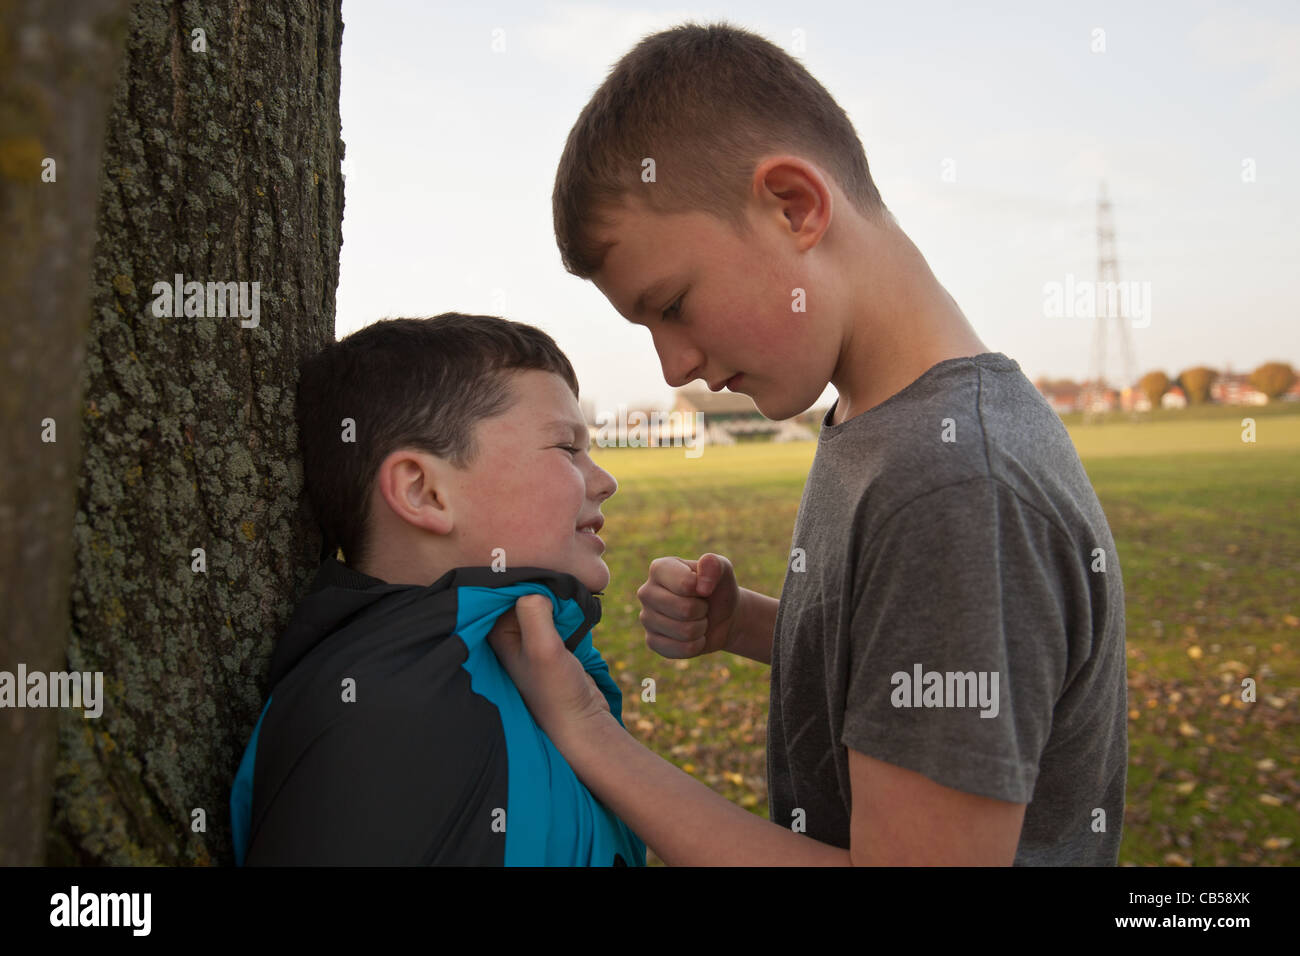 An older boy bullying a younger boy with his fist clinched holding him up against a tree. Stock Photo